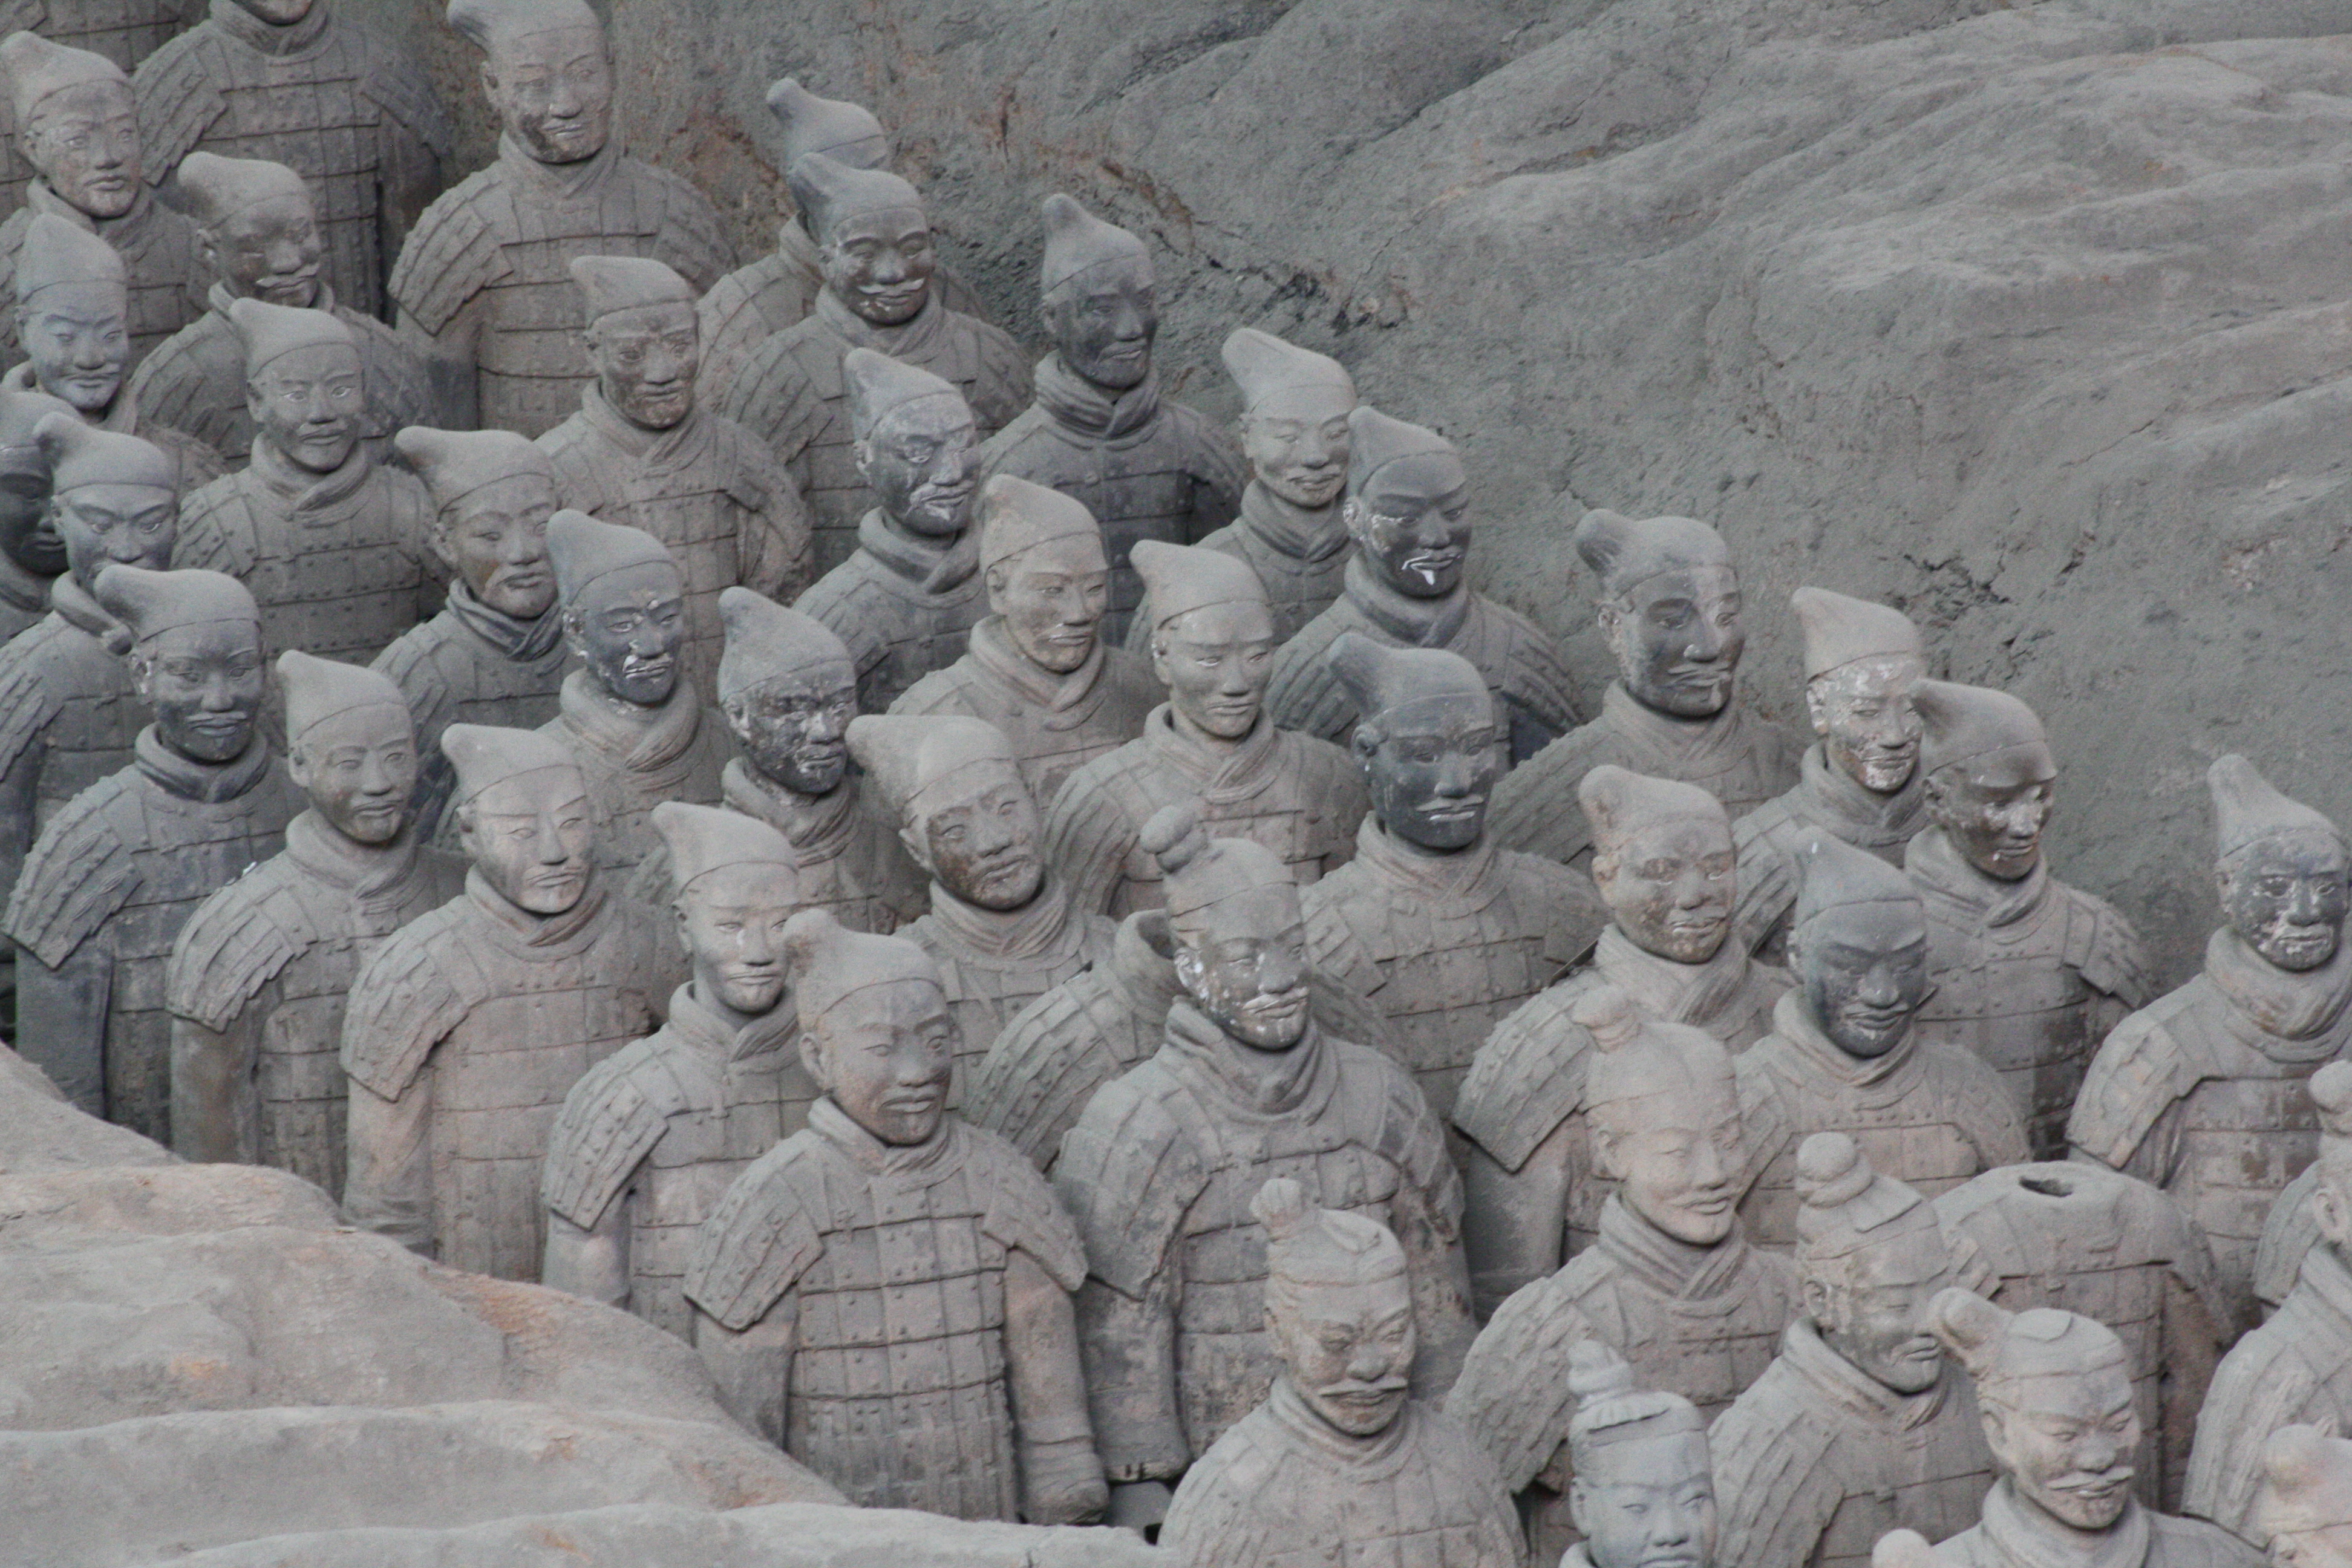 Terracotta Warriors Review & Guide